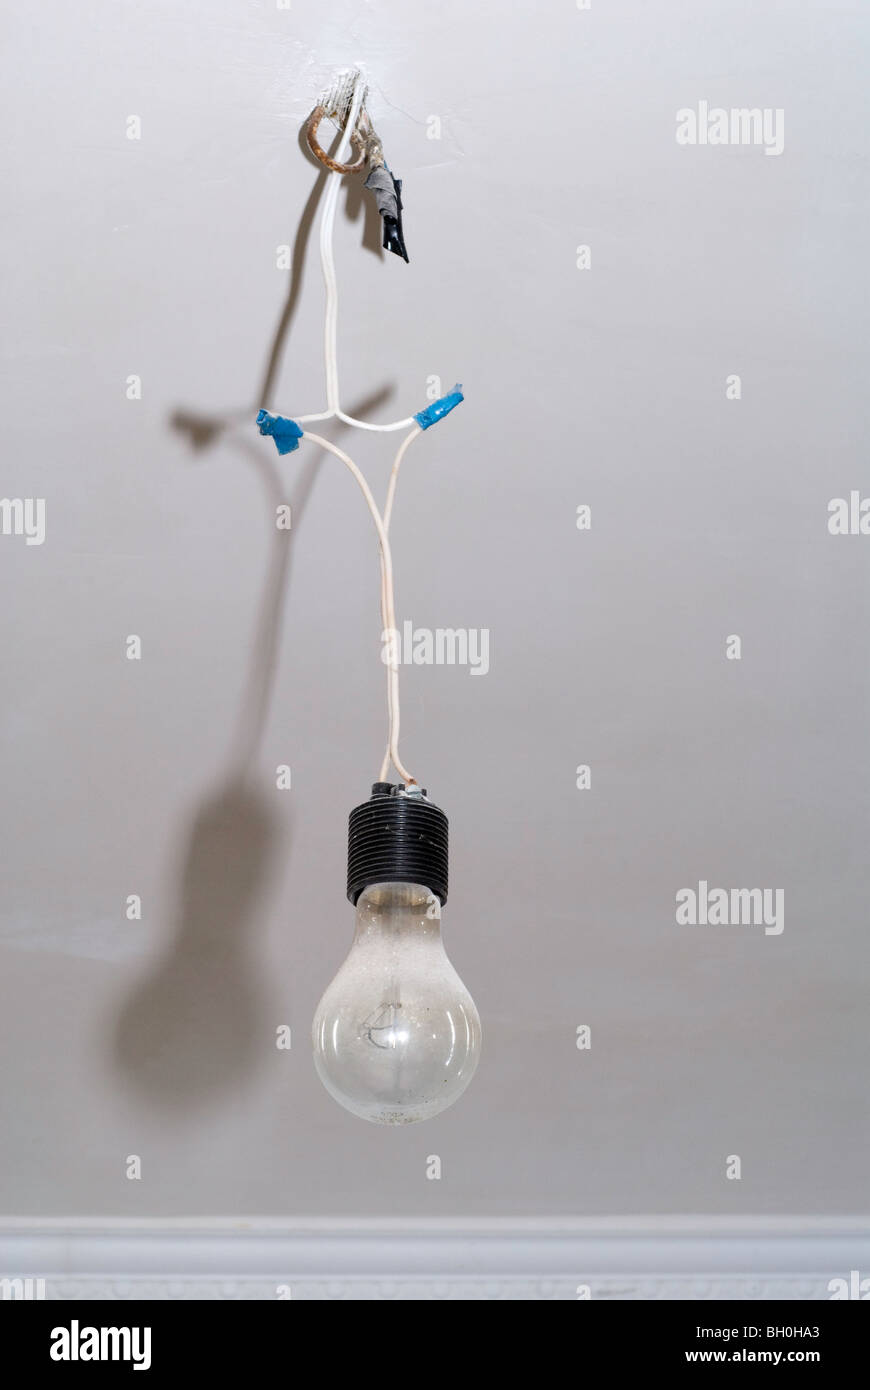 a light bulb on the celling Stock Photo